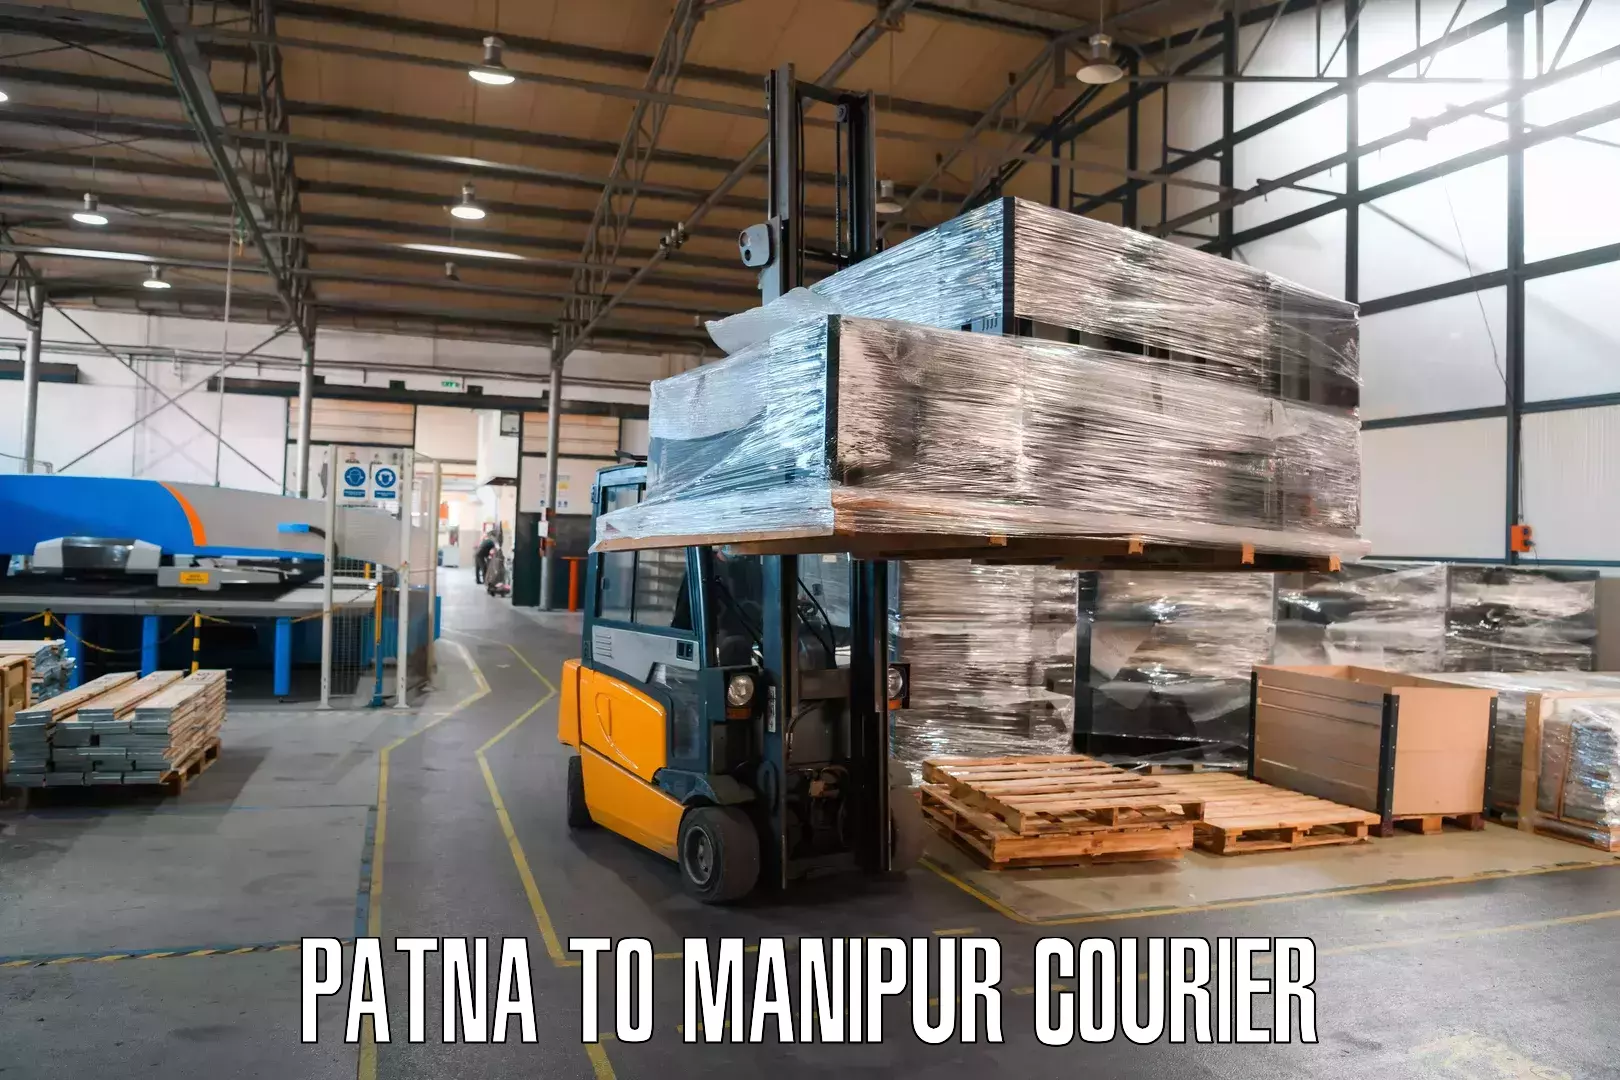 Courier membership Patna to Chandel